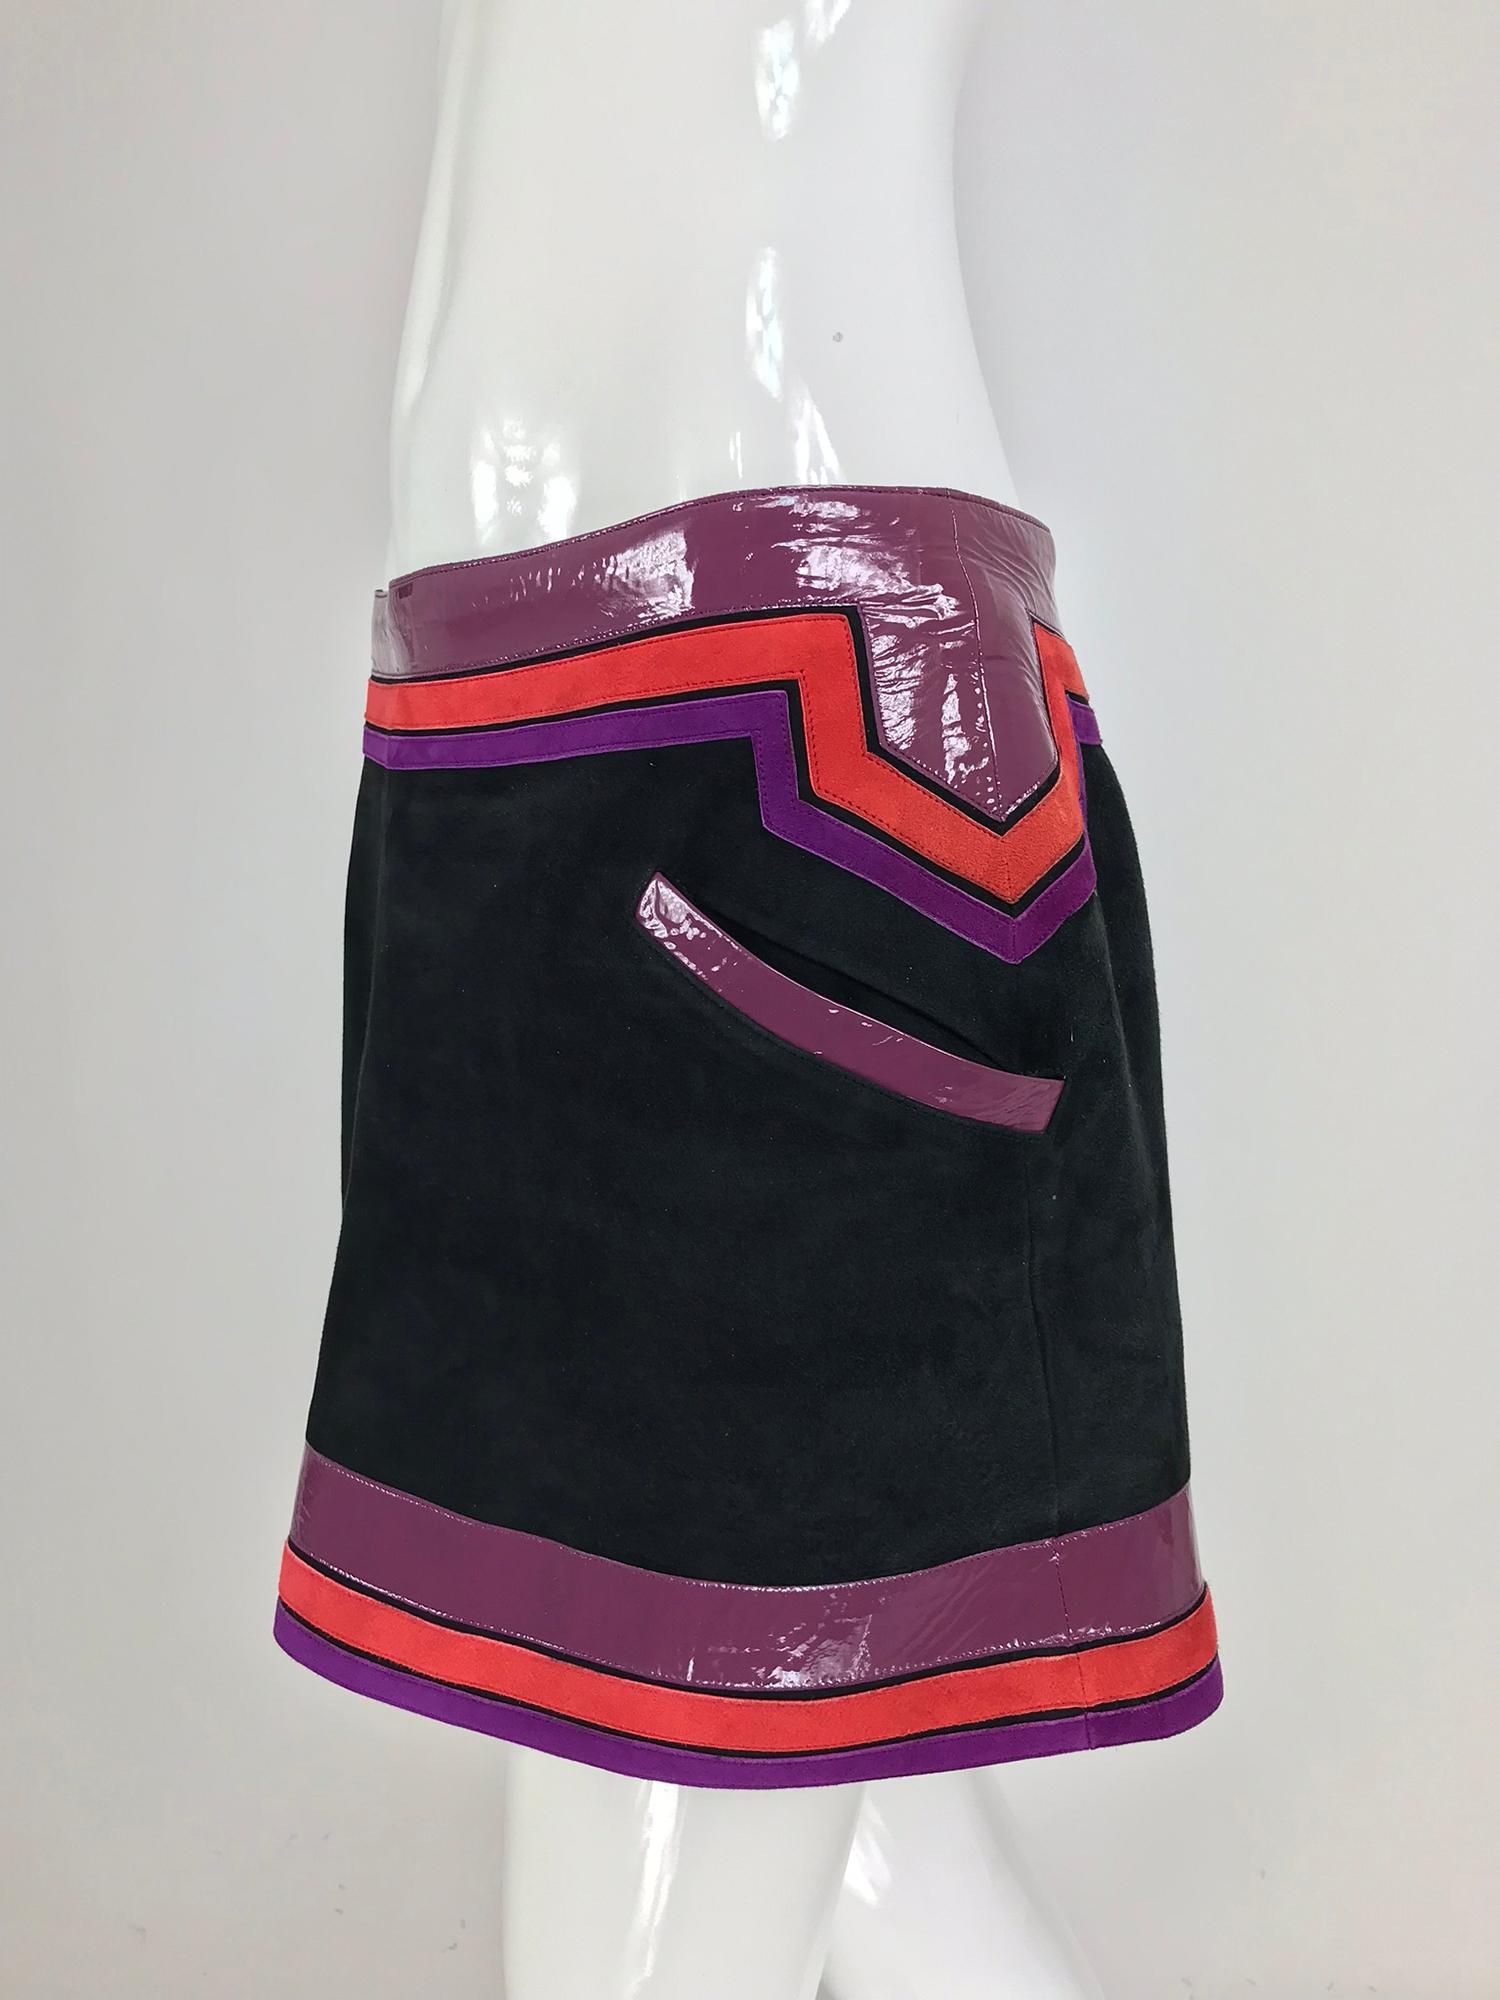 Gucci Black Suede Skirt Purple and Red Patent Leather Trim S/S 2007  3